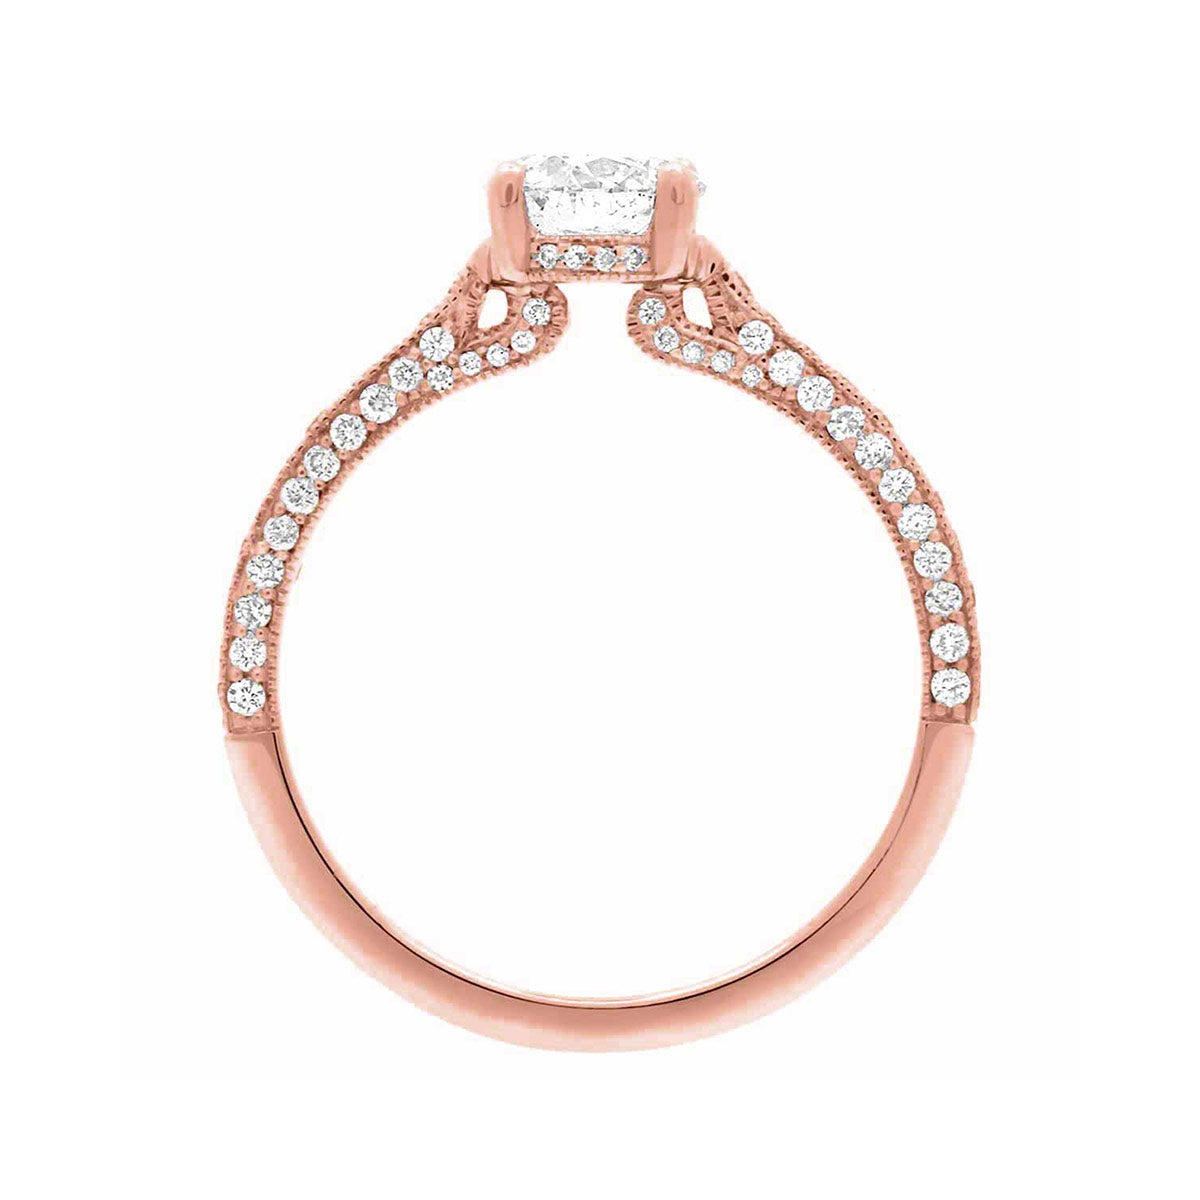 Thin Band Solitaire Ring with diamonds on sidewalls in rose gold pictured in an upright standing position